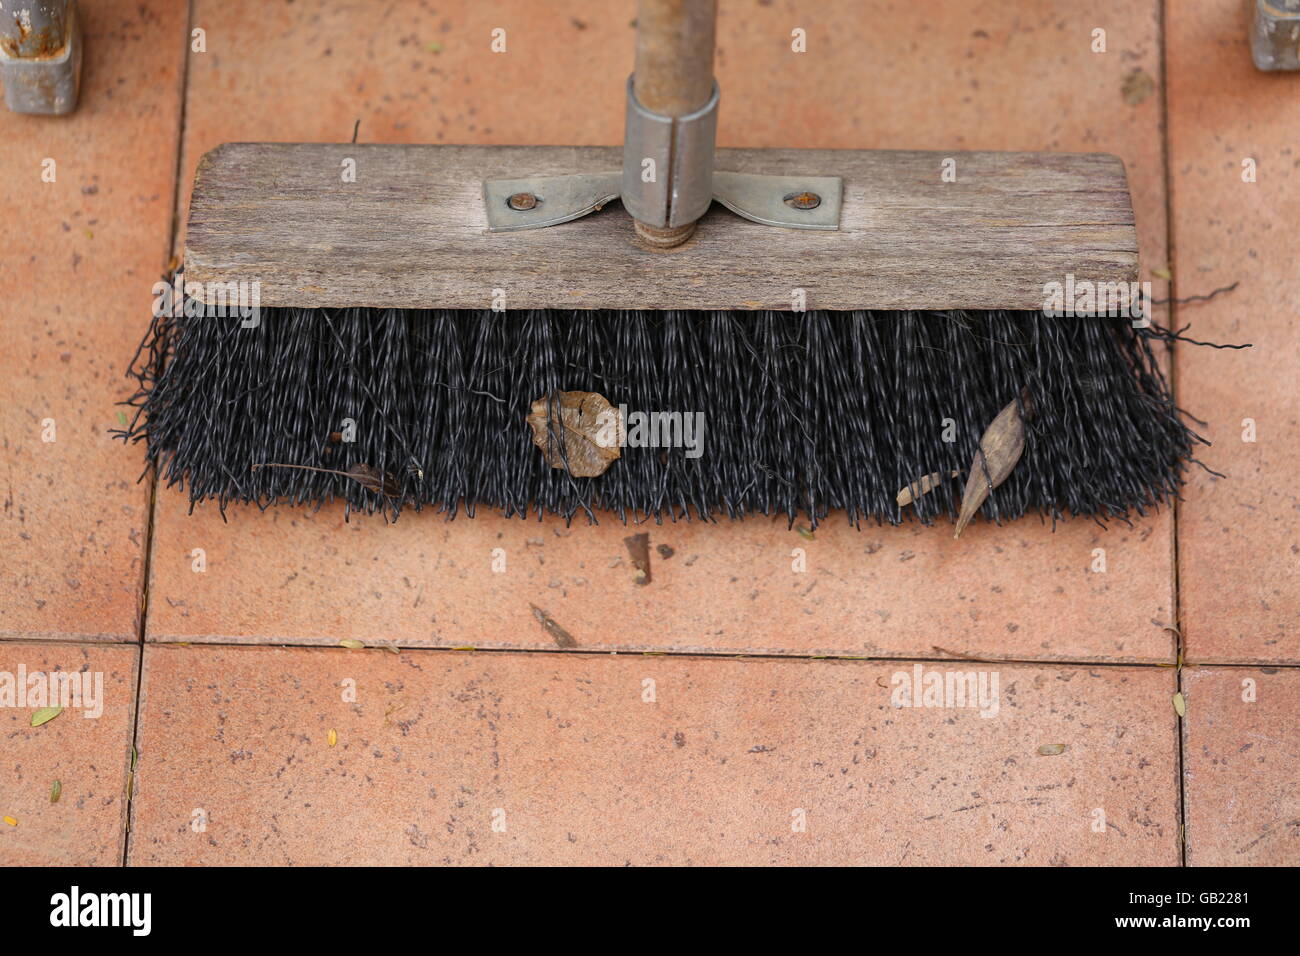 Broom. Wooden outdoor broom with synthetic hair on brown terracotta floor tile. Ladder legs in the photo corners. Stock Photo